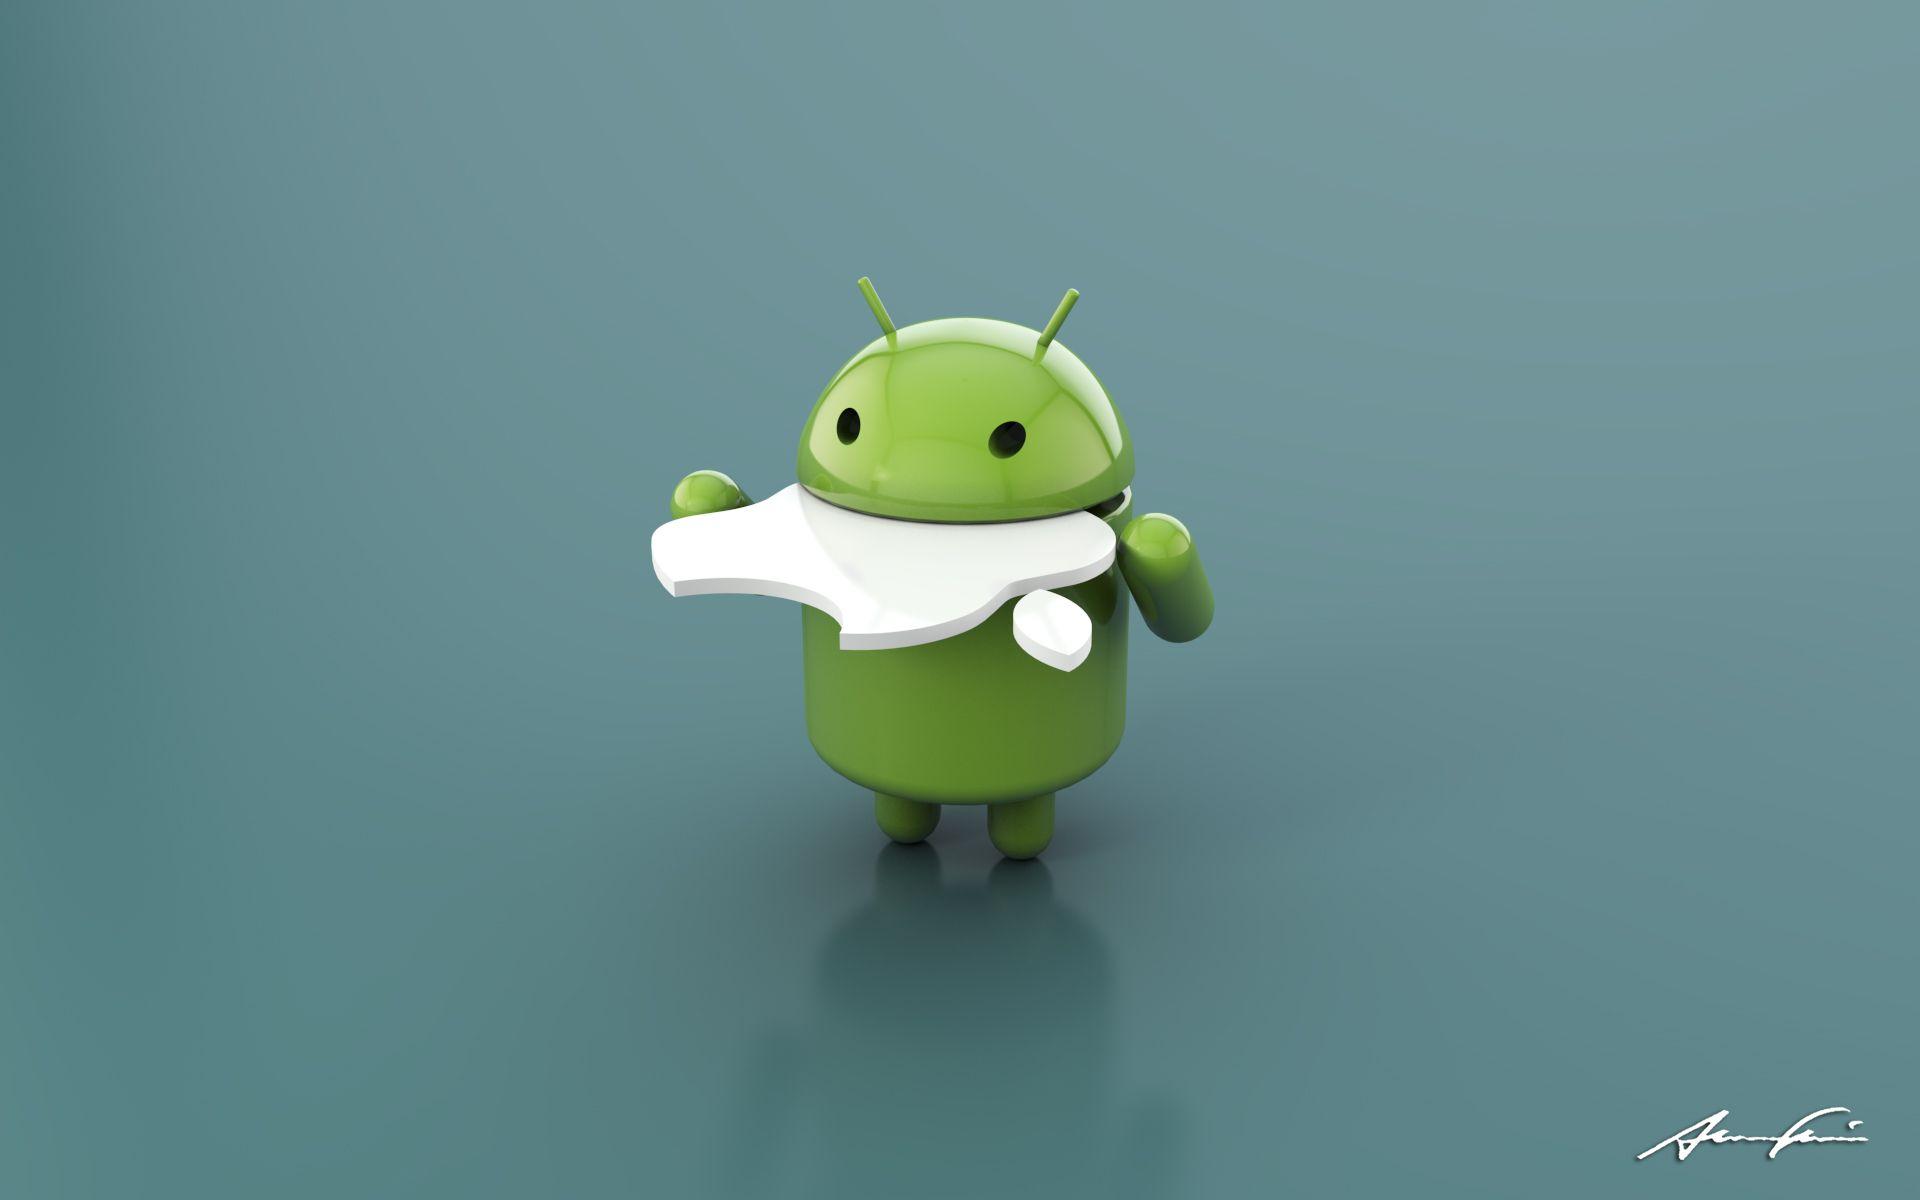 At 64% market share of the smartphone marketplace, Android is